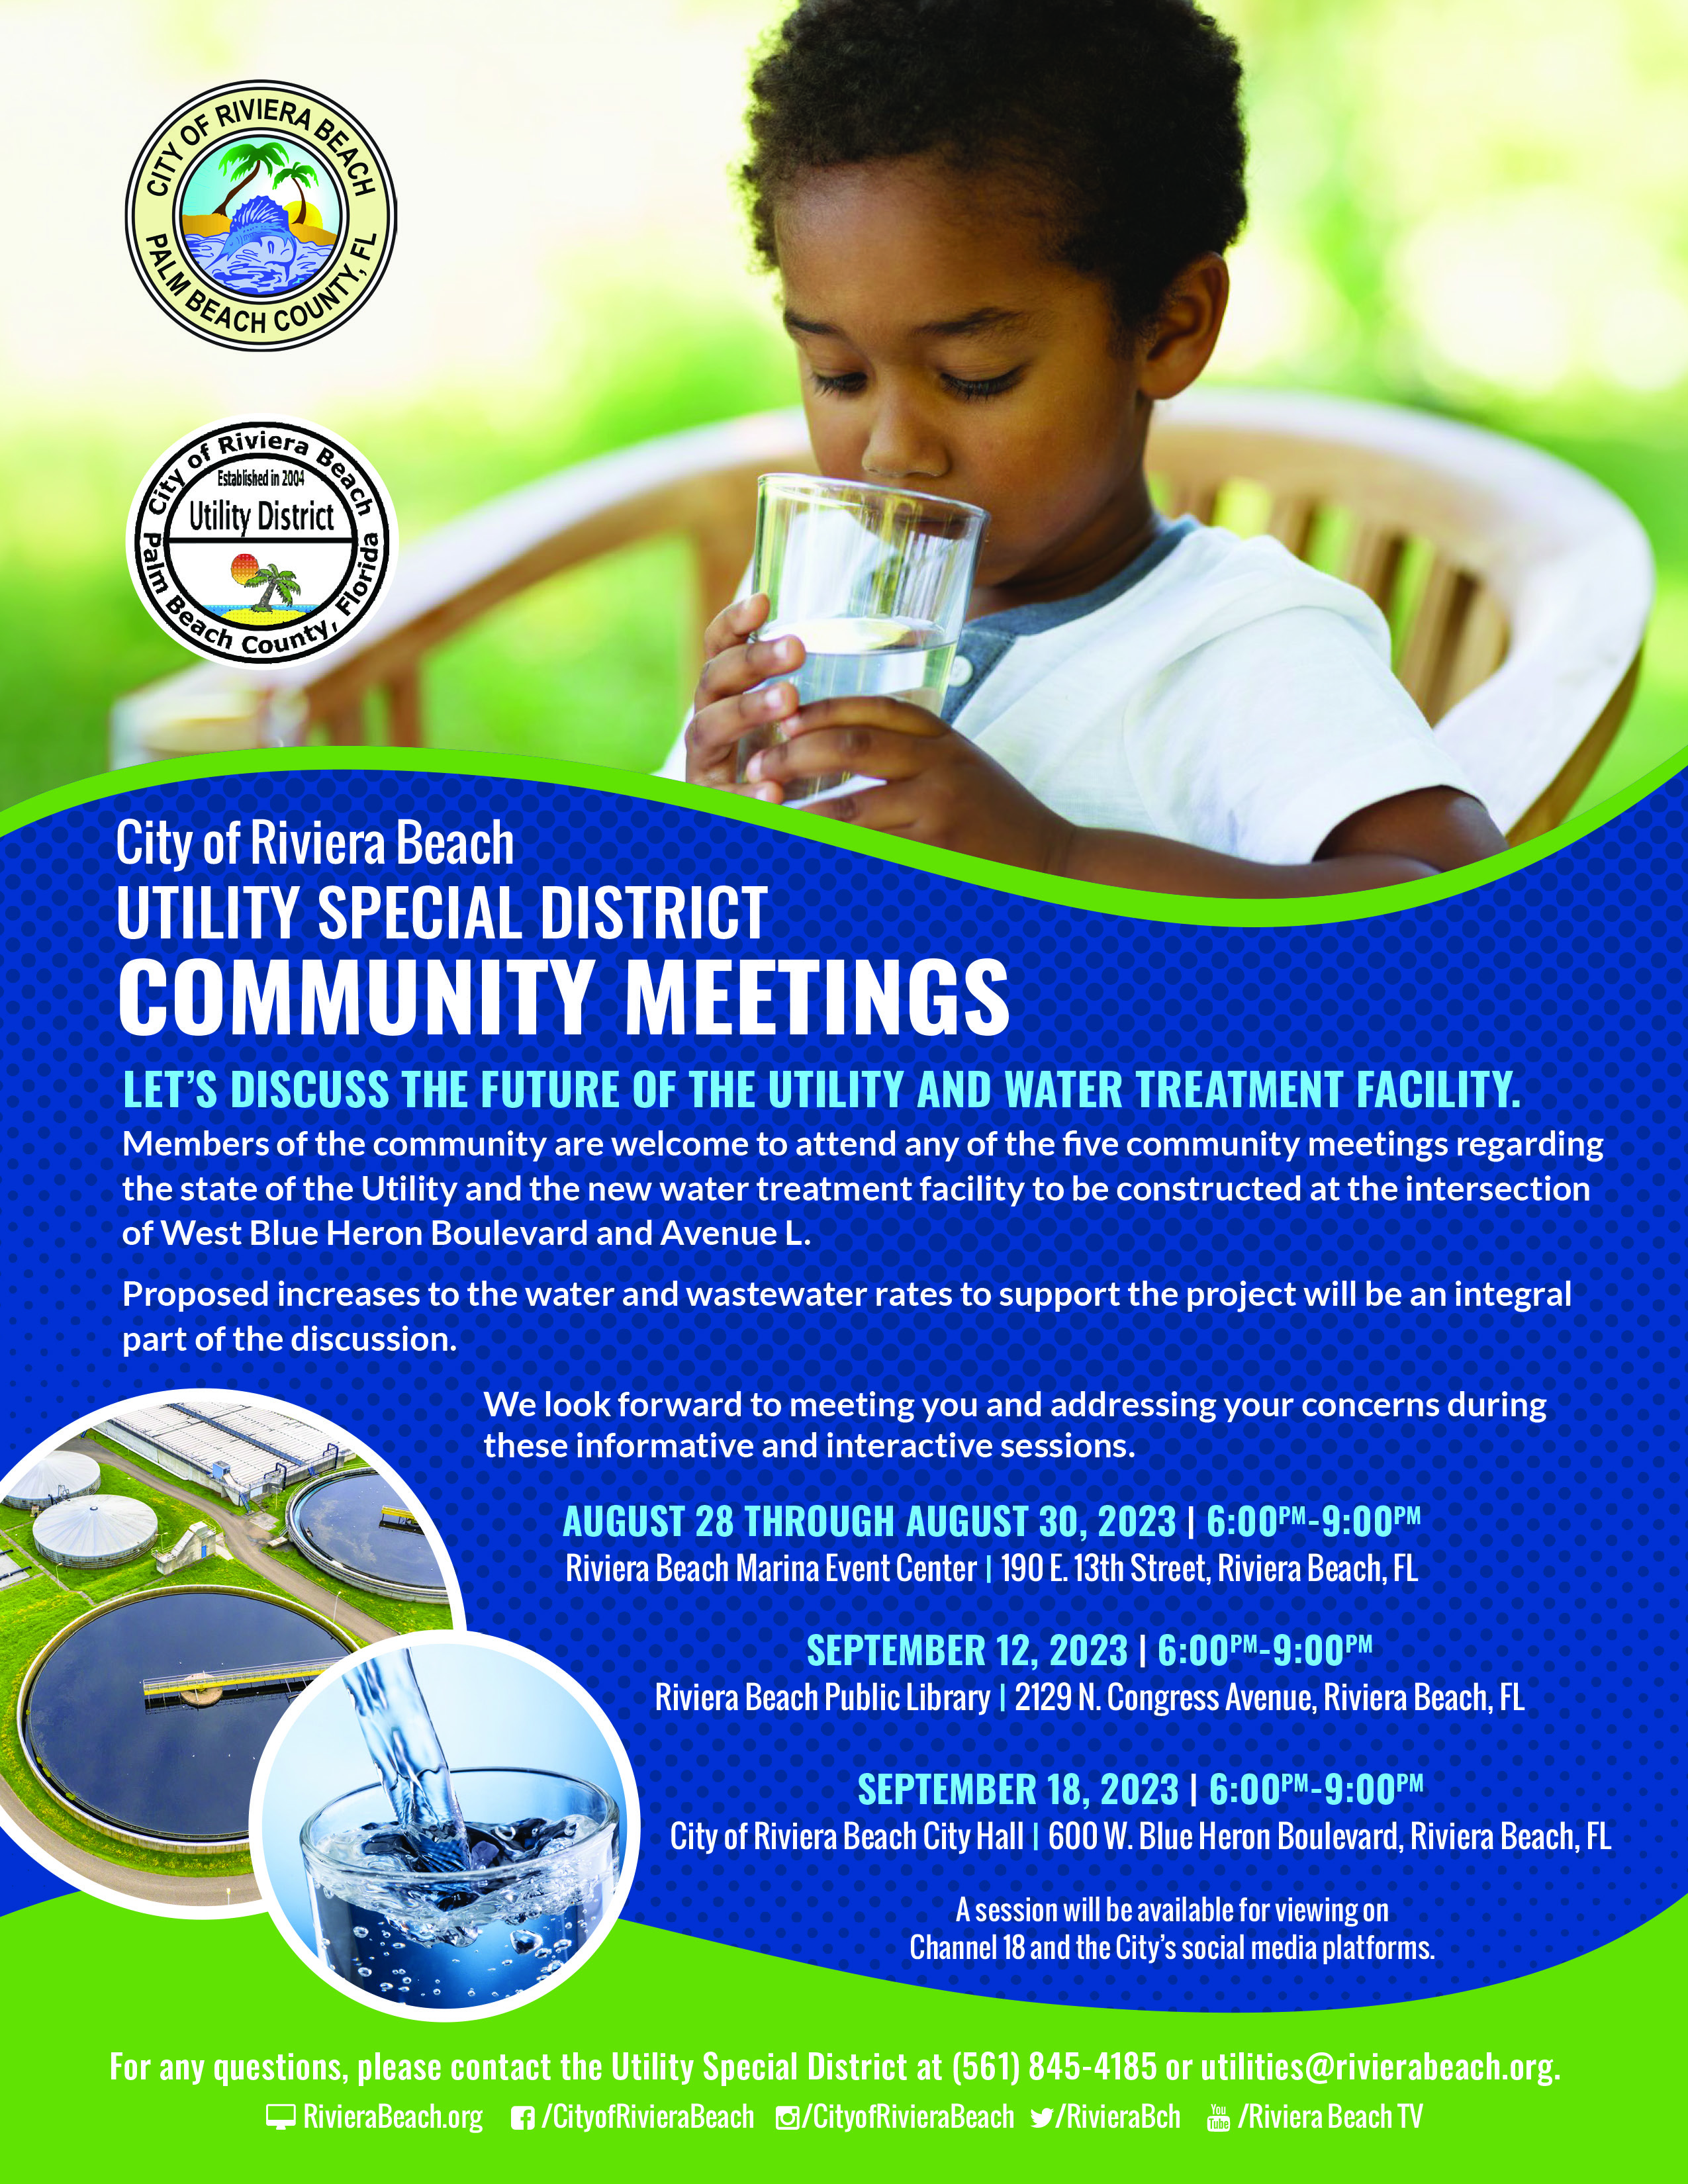 City of Riviera Beach UTILITY SPECIAL DISTRICT COMMUNITY MEETINGS LET'S DISCUSS THE FUTURE OF THE UTILITY AND WATER TREATMENT FACILITY. Members of the community are welcome to attend any of the five community meetings regarding the state of the Utility and the new water treatment facility to be constructed at the intersection of West Blue Heron Boulevard and Avenue L. Proposed increases to the water and wastewater rates to support the project will be an integral part of the discussion. We look forward to meeting you and addressing your concerns during these informative and interactive sessions. AUGUST 28 THROUGH AUGUST 30, 2023 | 6:00PM-9:00PM Riviera Beach Marina Event Center I 190 E. 13th Street, Riviera Beach, FL SEPTEMBER 12, 2023 1 6:00PM-9:00PM Riviera Beach Public Library I 2129 N. Congress Avenue, Riviera Beach, FL SEPTEMBER 18, 2023 | 6:00PM-9:00PM City of Riviera Beach City Hall I 600 W. Blue Heron Boulevard, Riviera Beach, FL A session will be available for viewing on Channel 18 and the City's social media platforms.